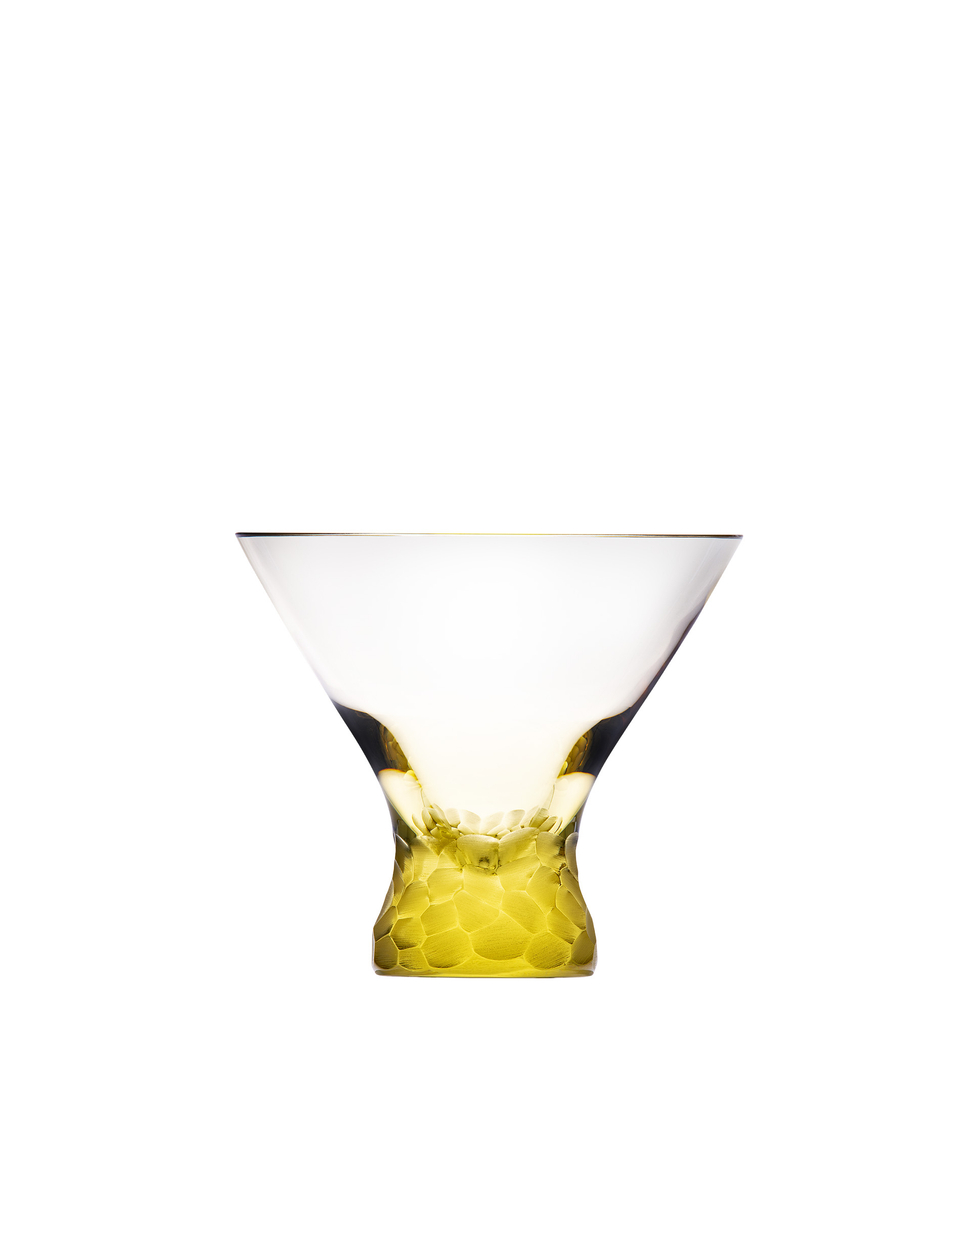 Cocktail or martini glass 250 ml from the Fluent collection